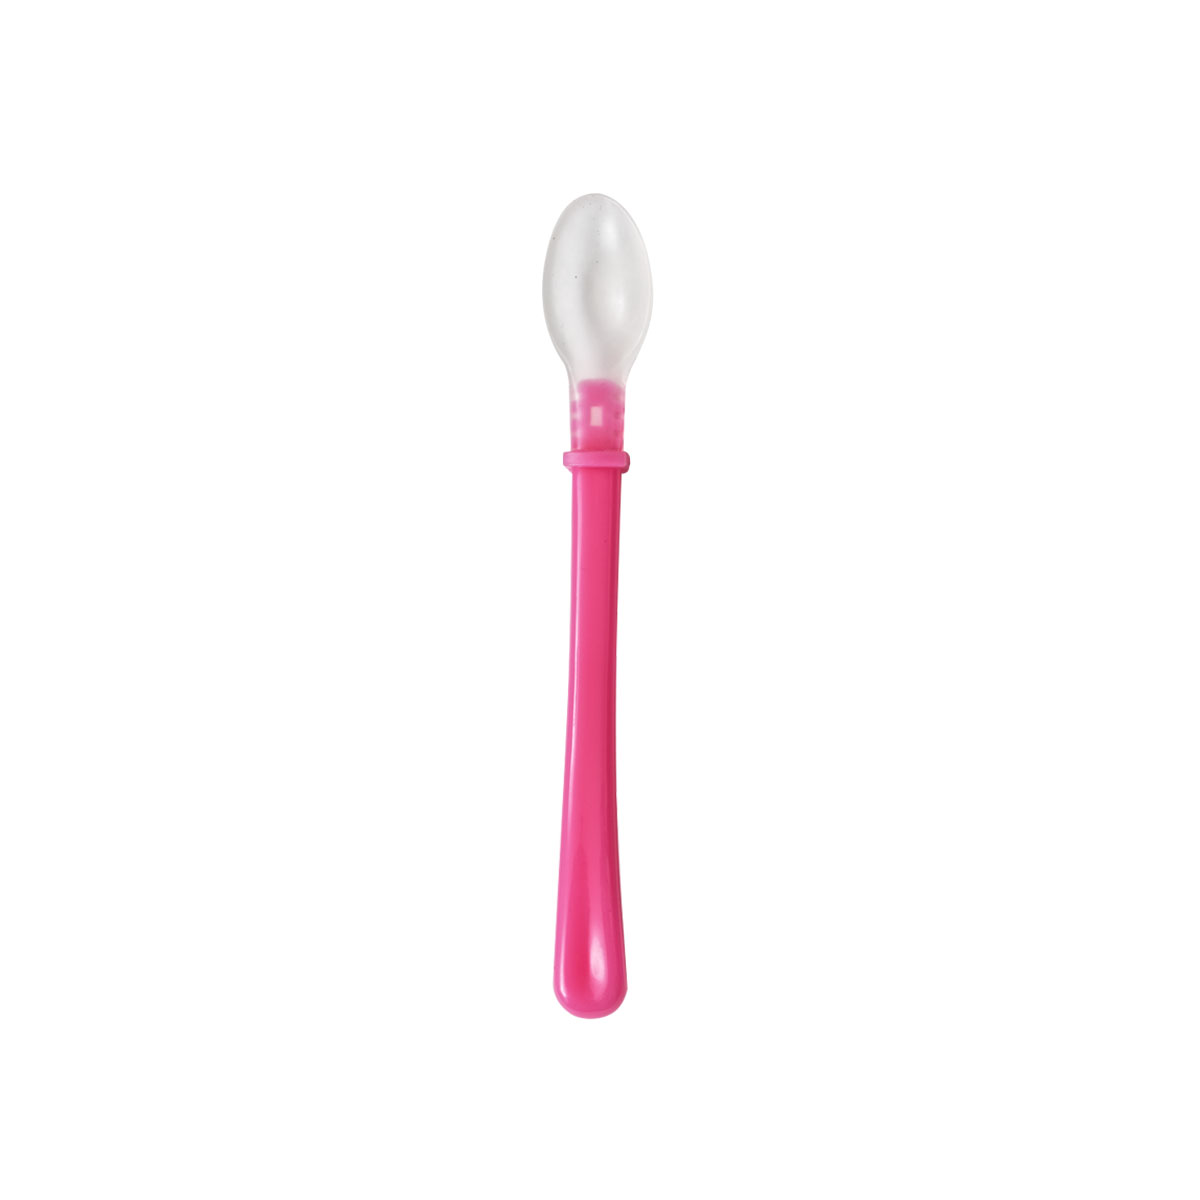 BABY PUR CUILLERE SILICONE 4M+ RF BD15007